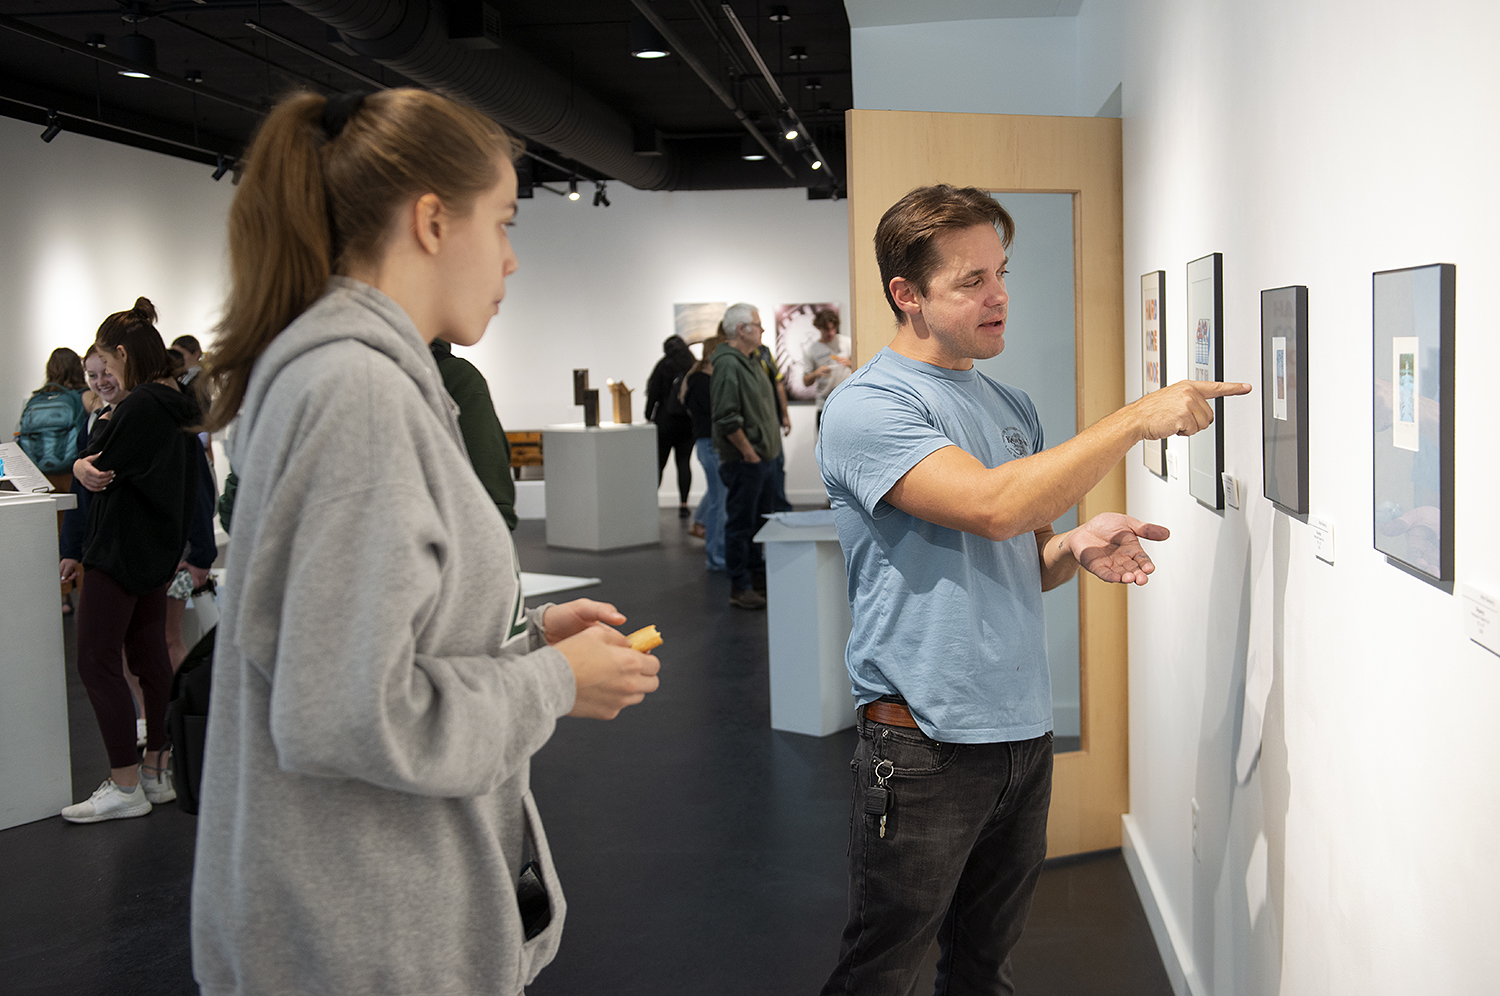 BSU faculty member pointing to art in a gallery and speaking with a student